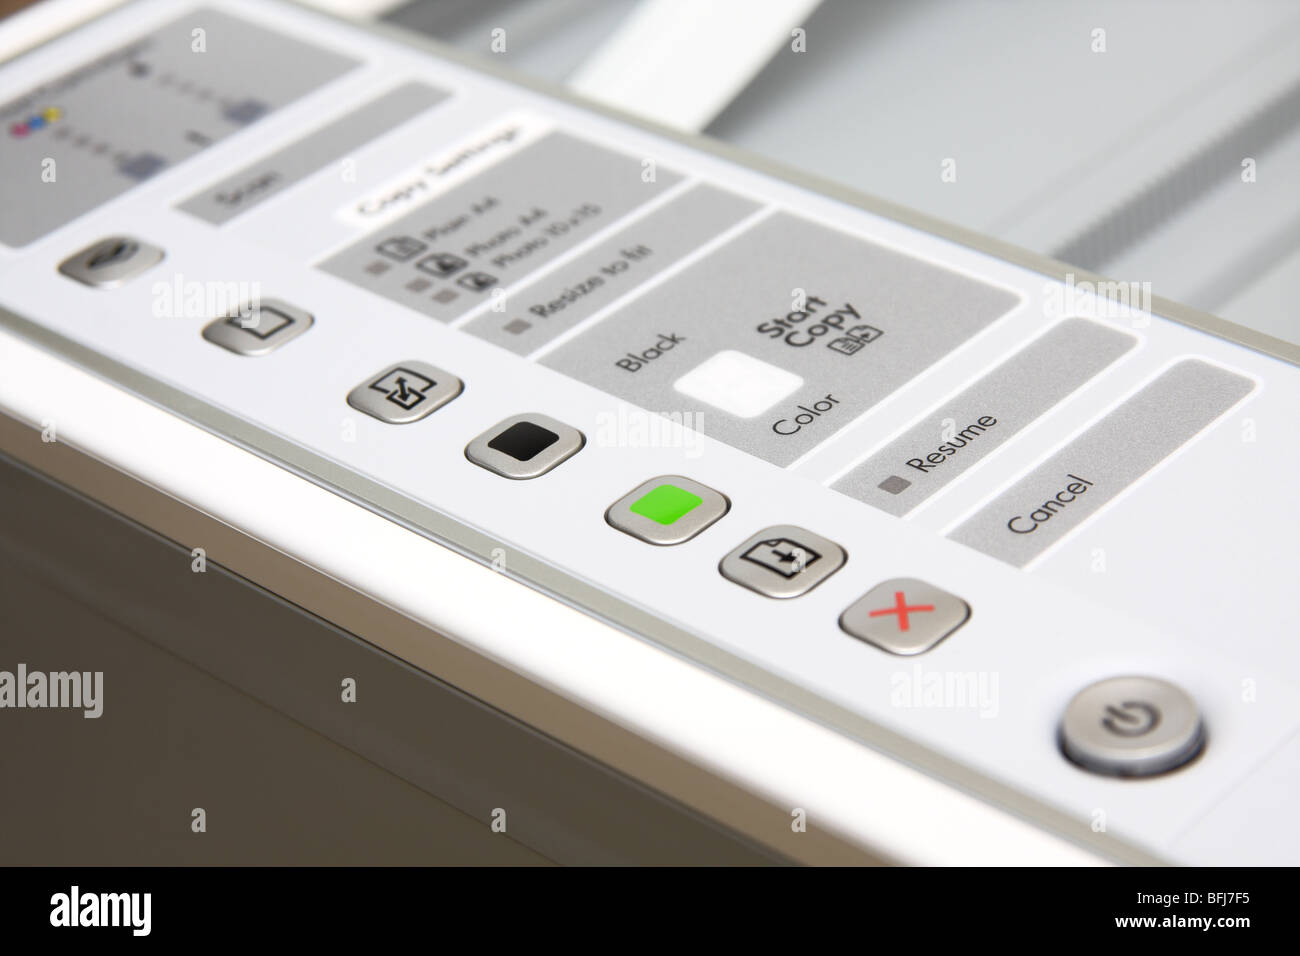 All-in-one printer, scanner, copier. Control view close-up. Stock Photo